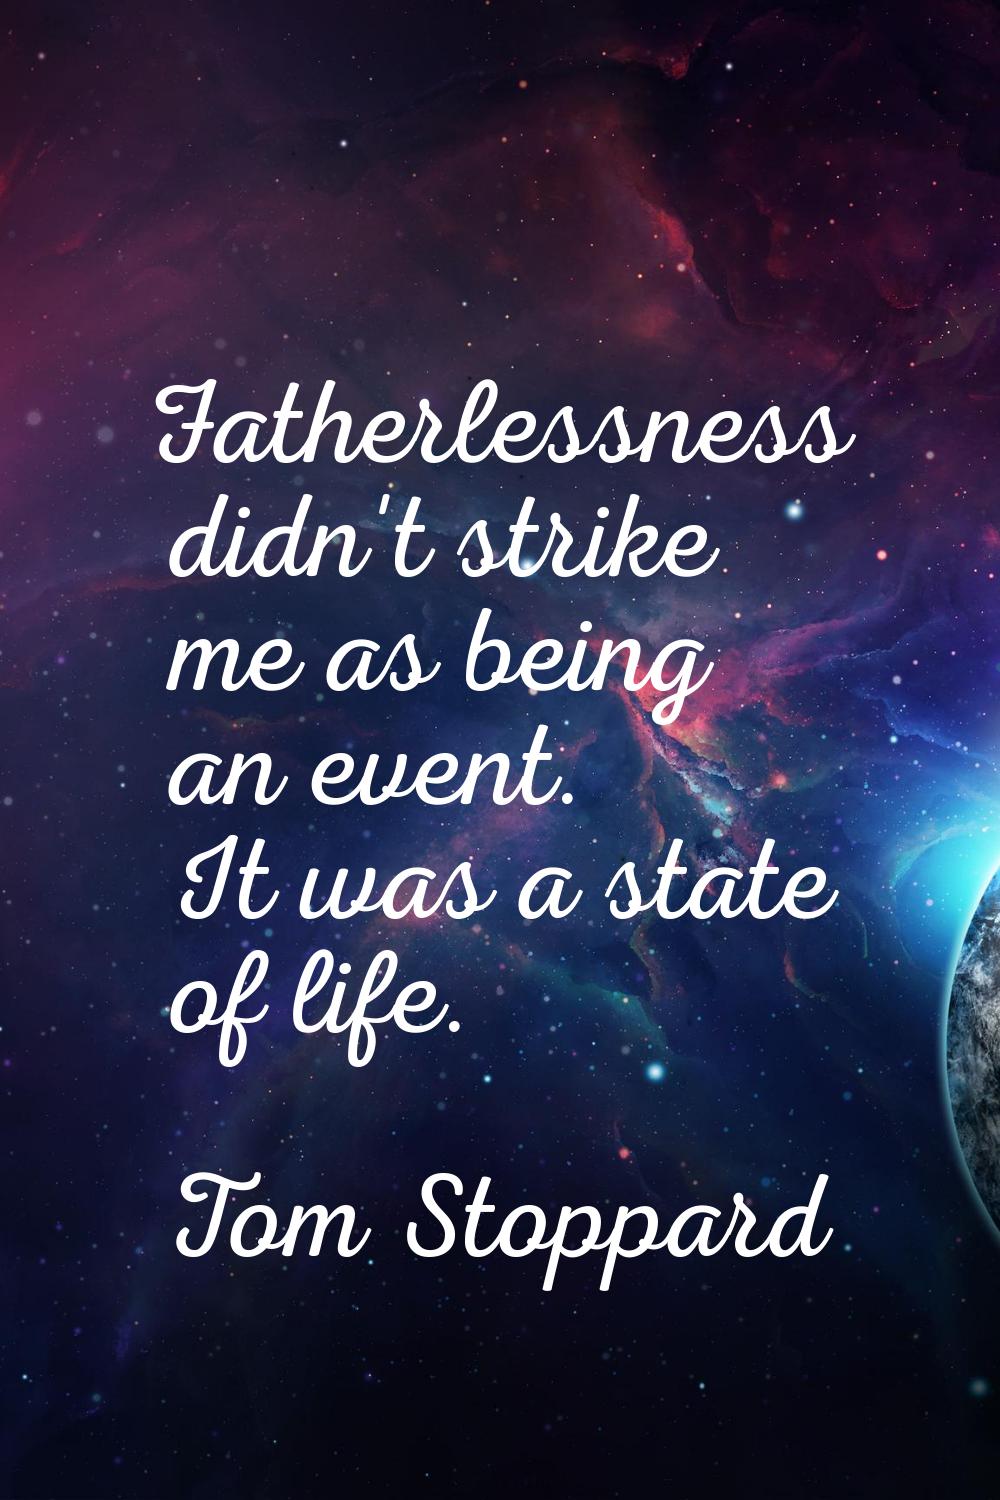 Fatherlessness didn't strike me as being an event. It was a state of life.